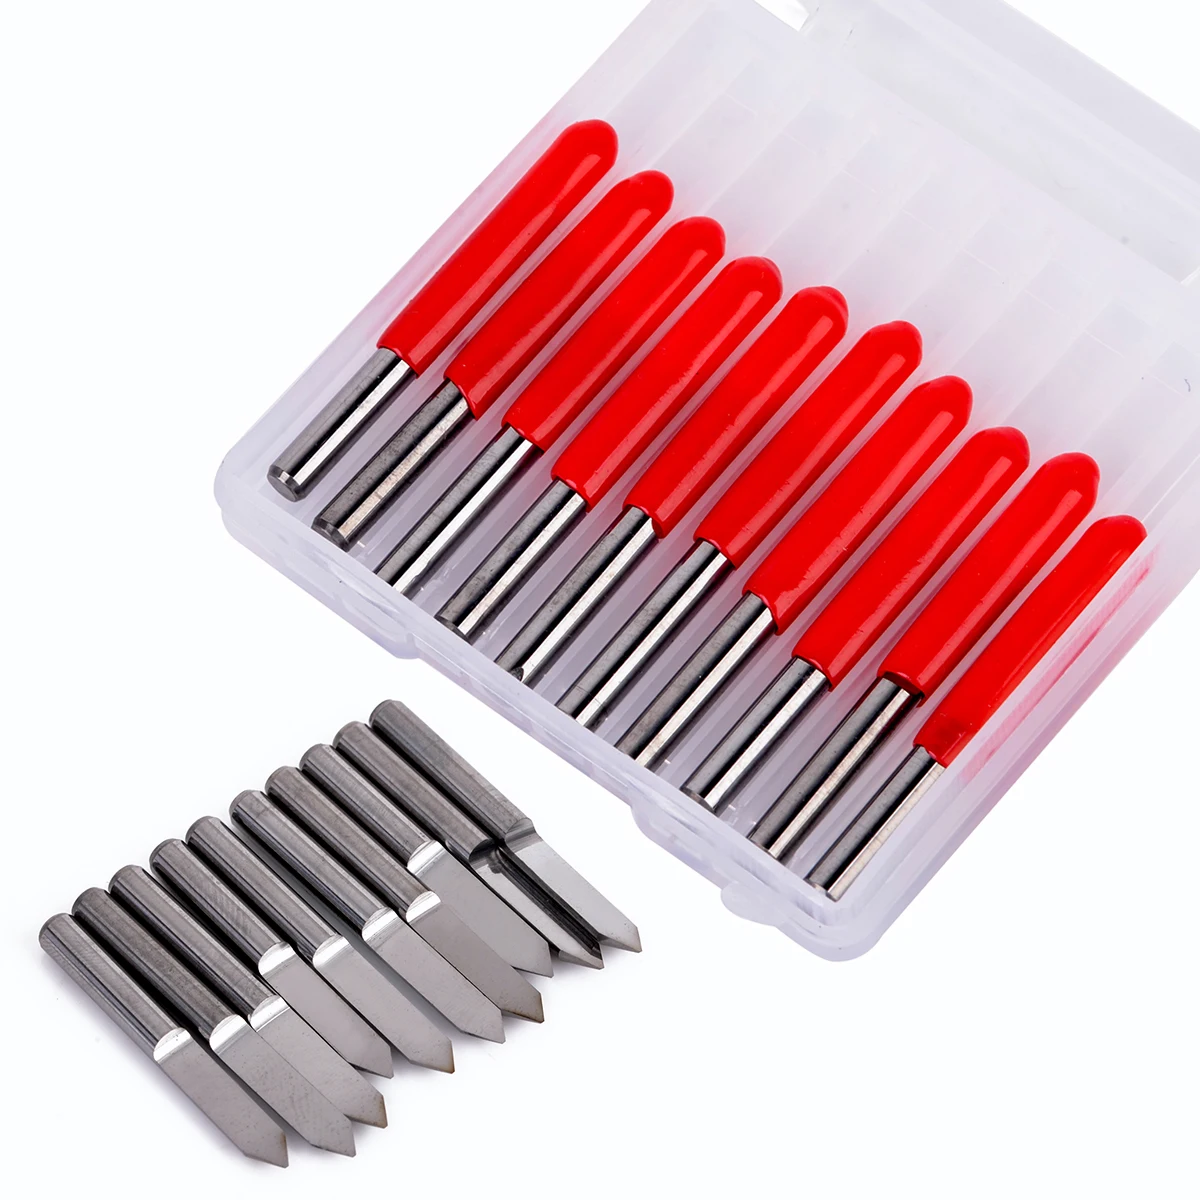 10Pcs 60 Degree 0.1mm Carbide Engraving Bits CNC Router Tool for PCB board